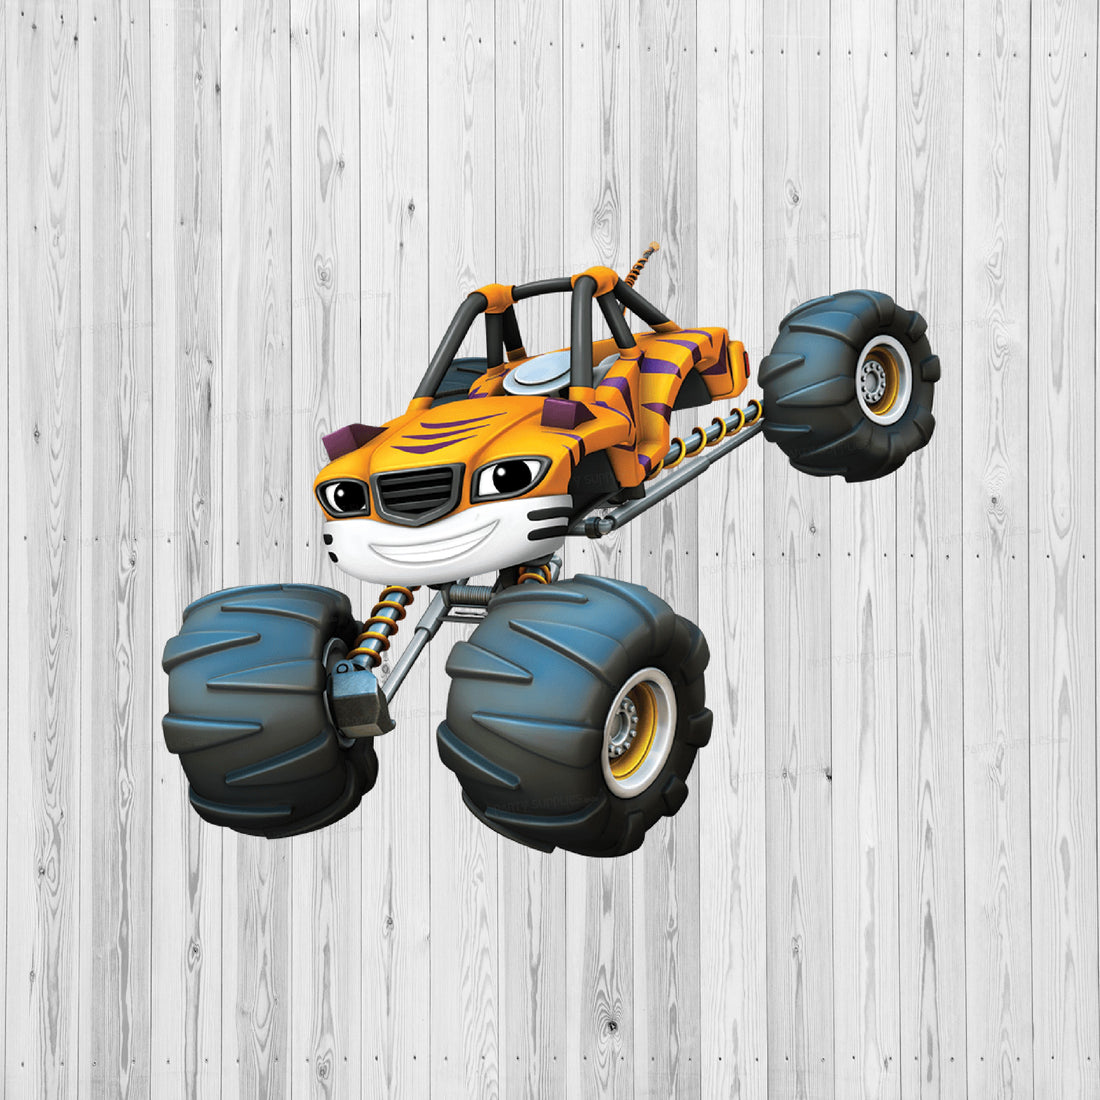 PSI Blaze and the Monster Machines Theme Cutout - 08